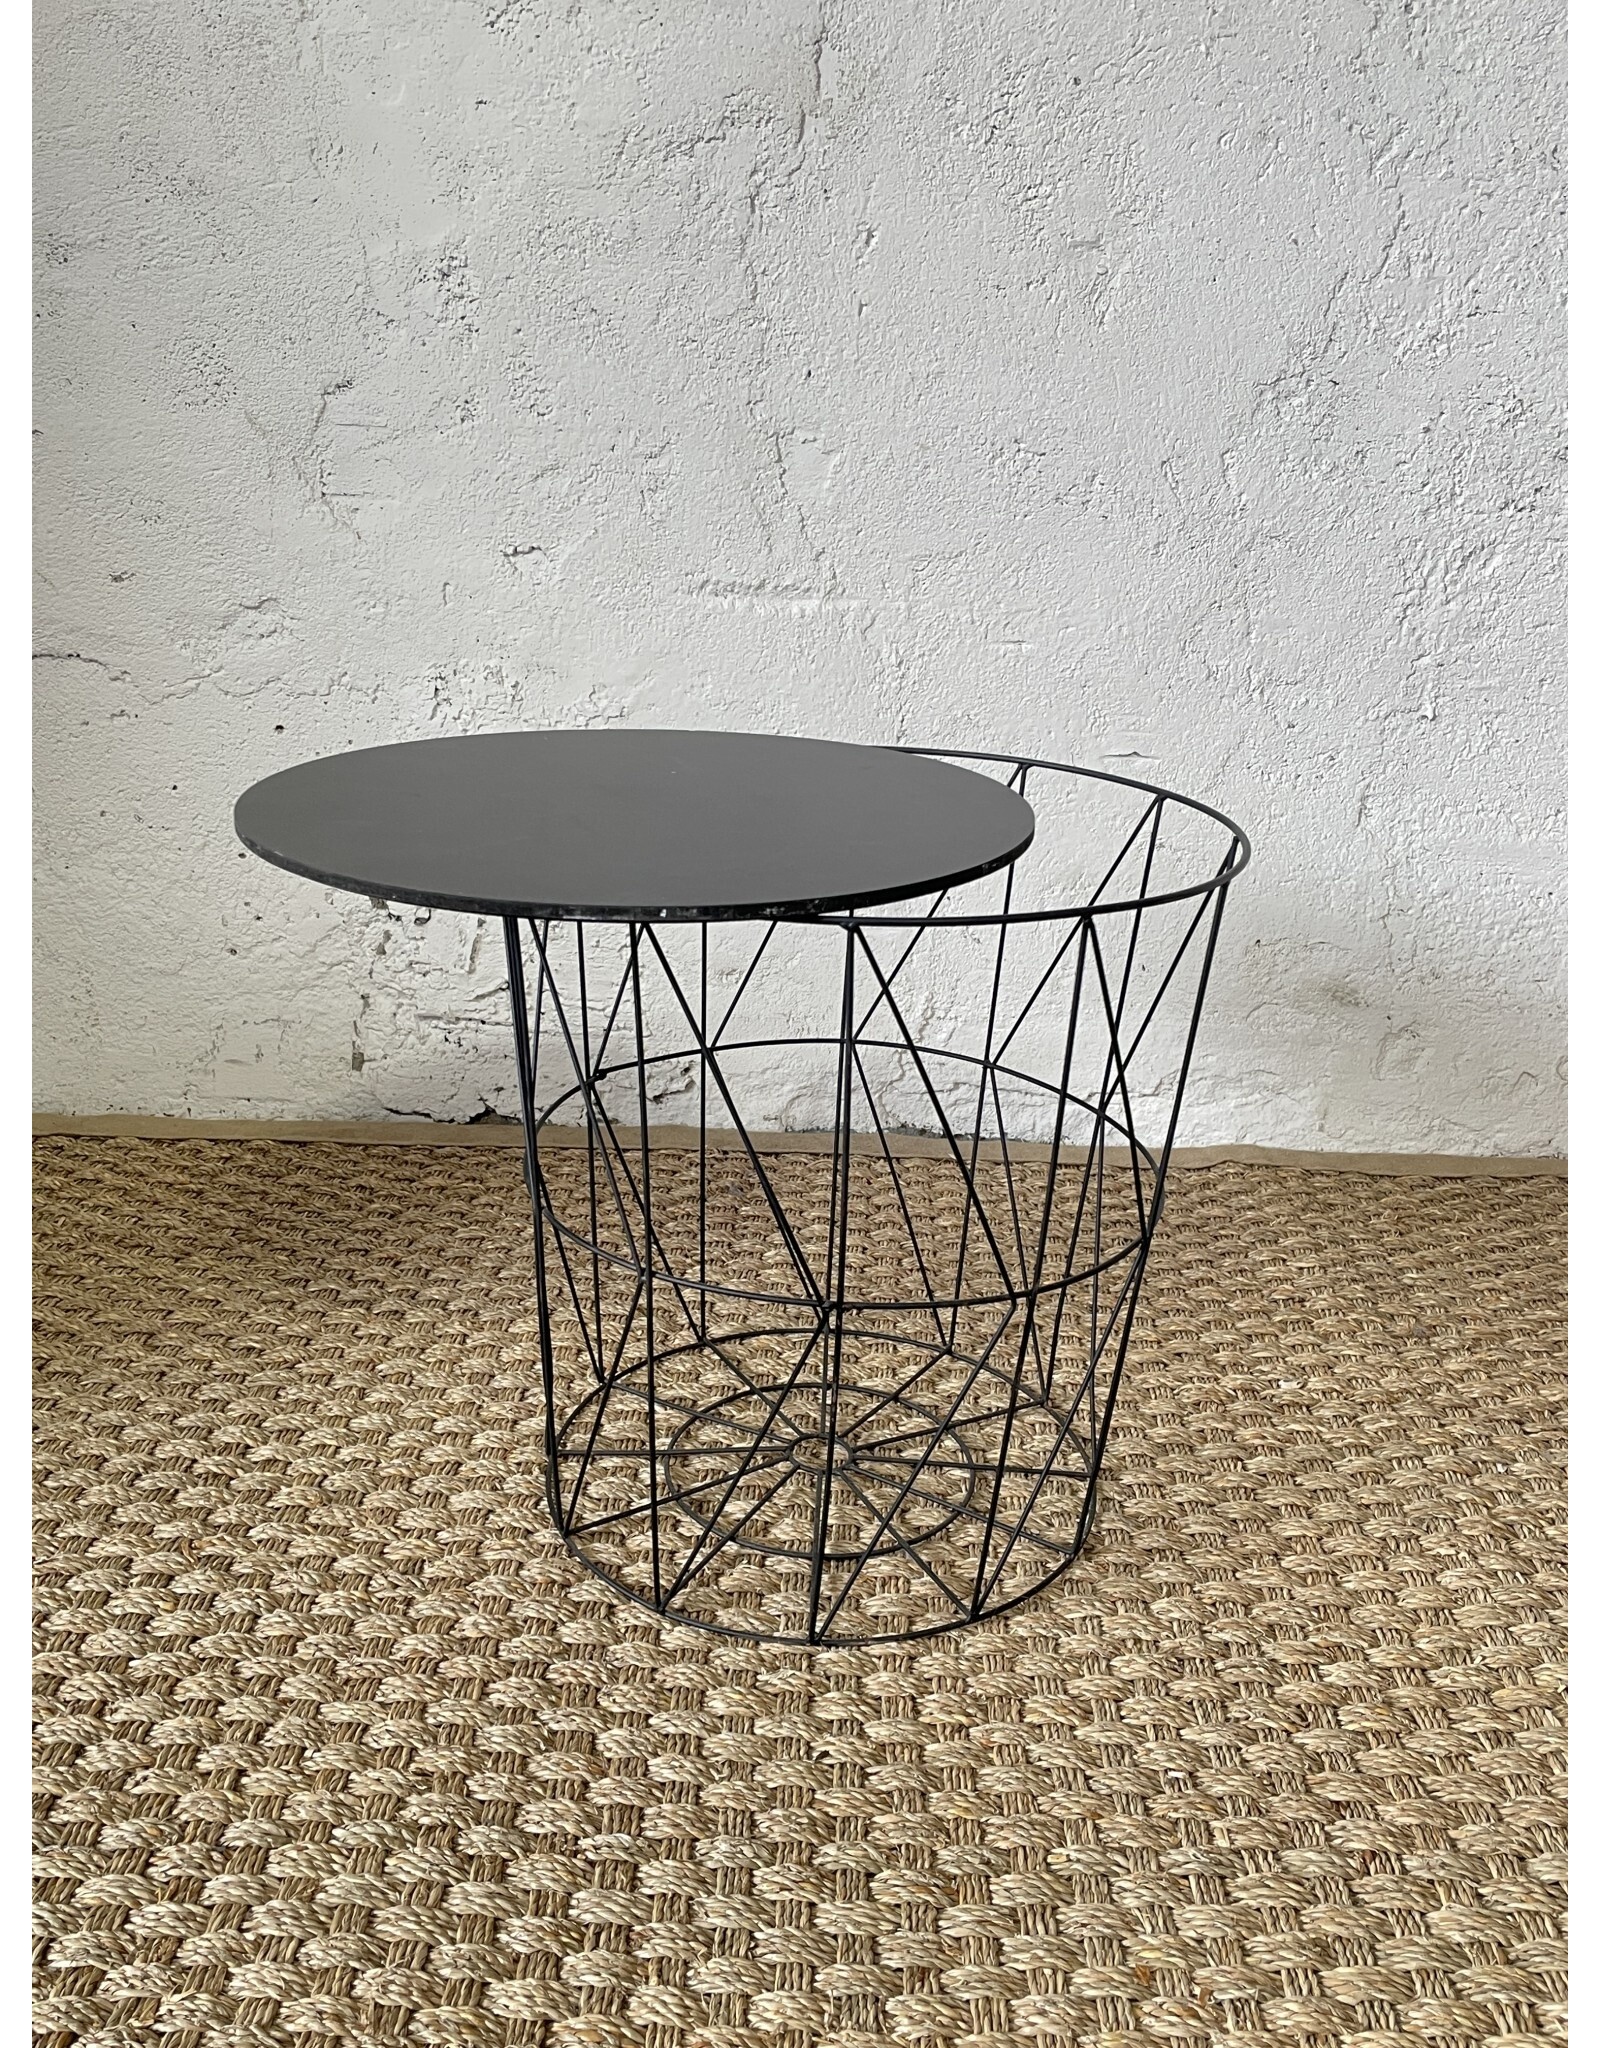 Mesh Wire End Table with Removable Top